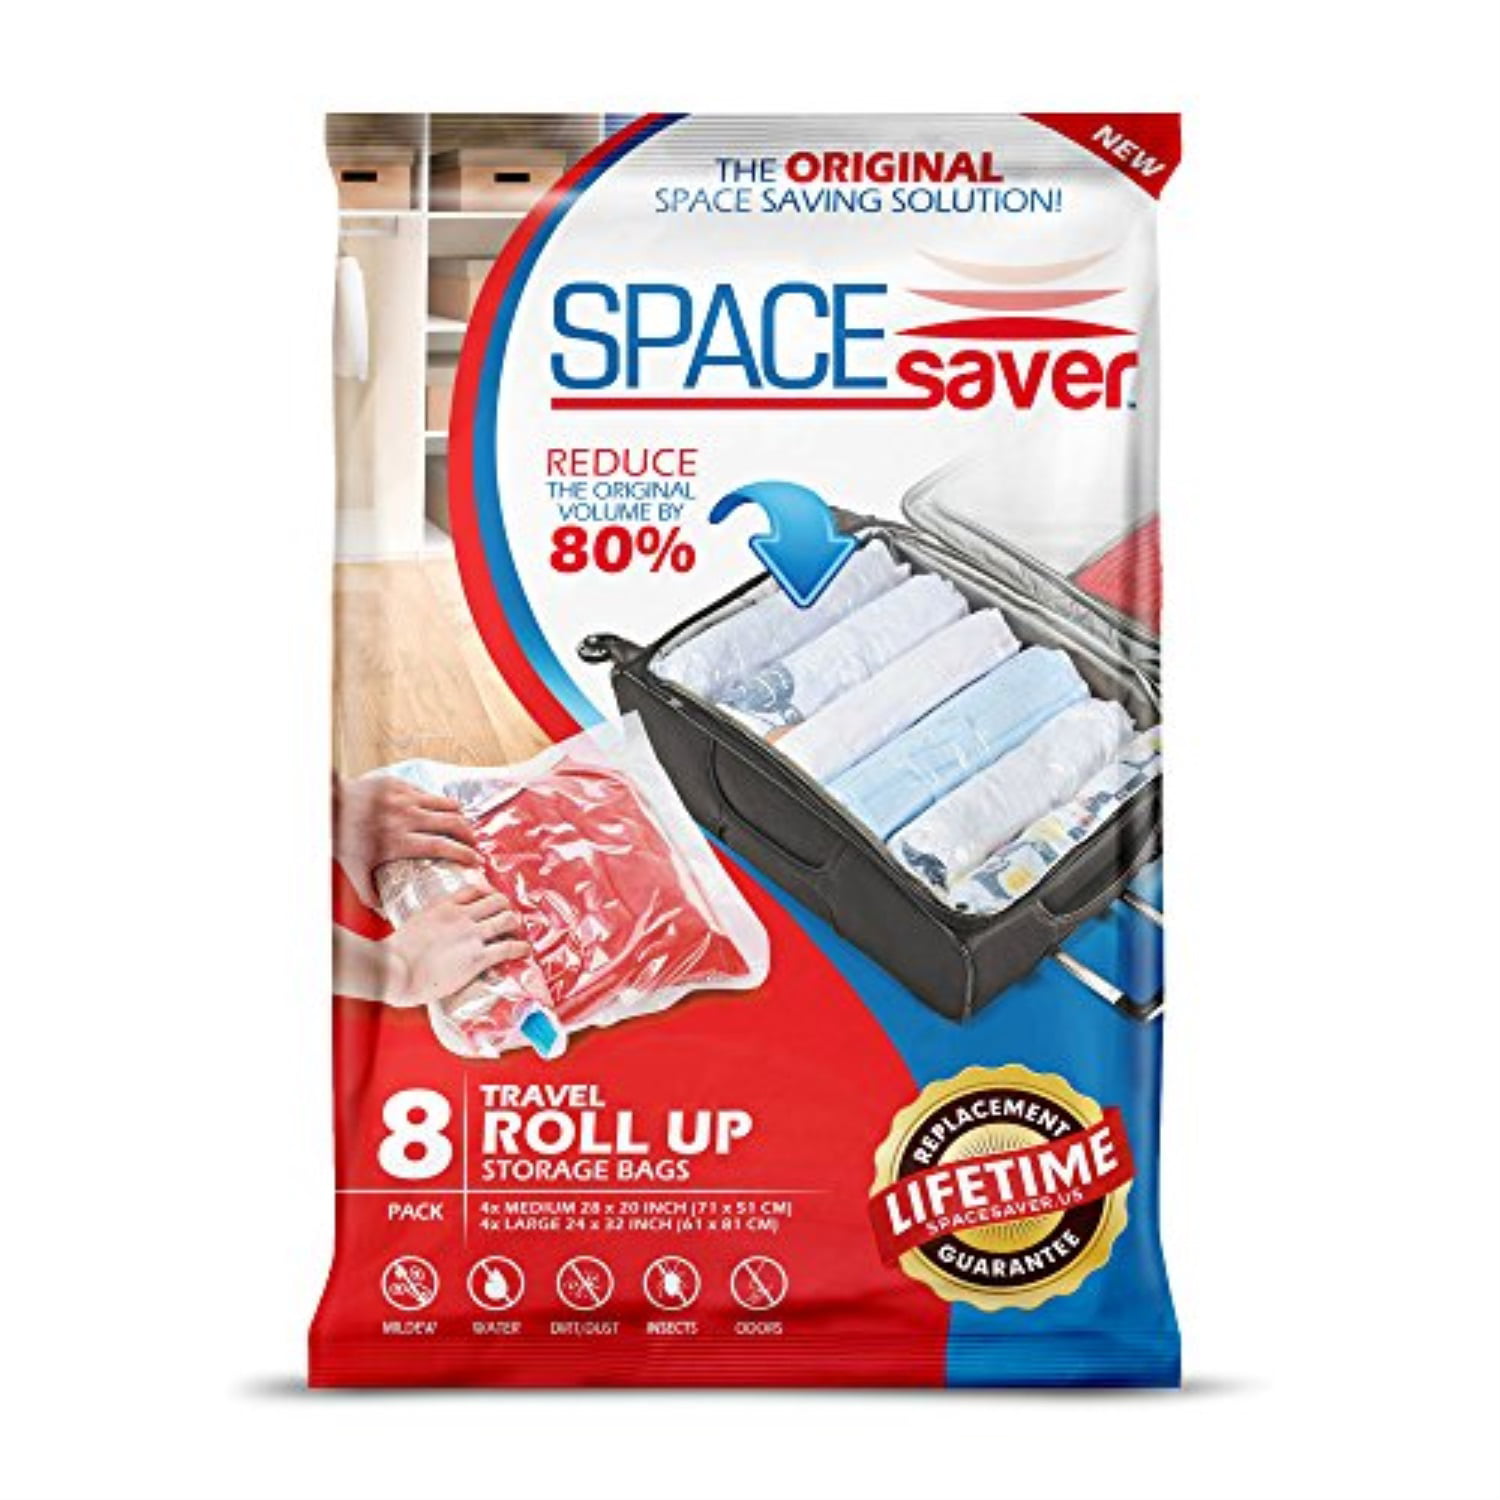 15 PACK ROLL-UP TRAVEL STORAGE BAG SPACE SAVER DISCOUNT 